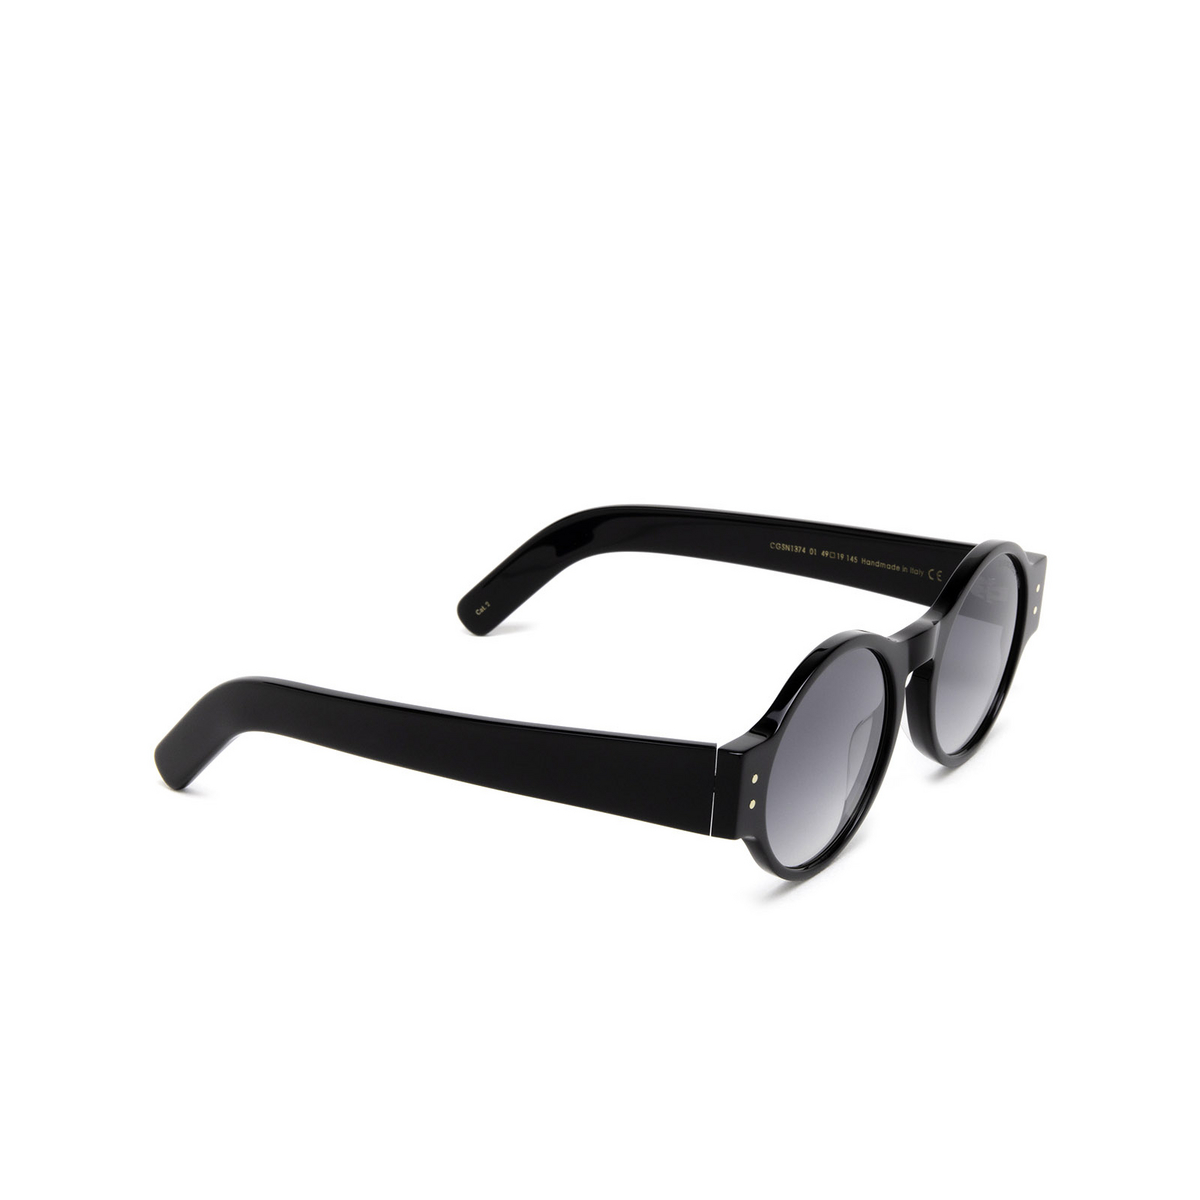 Cutler and Gross 1374 Sunglasses 01 Black - three-quarters view